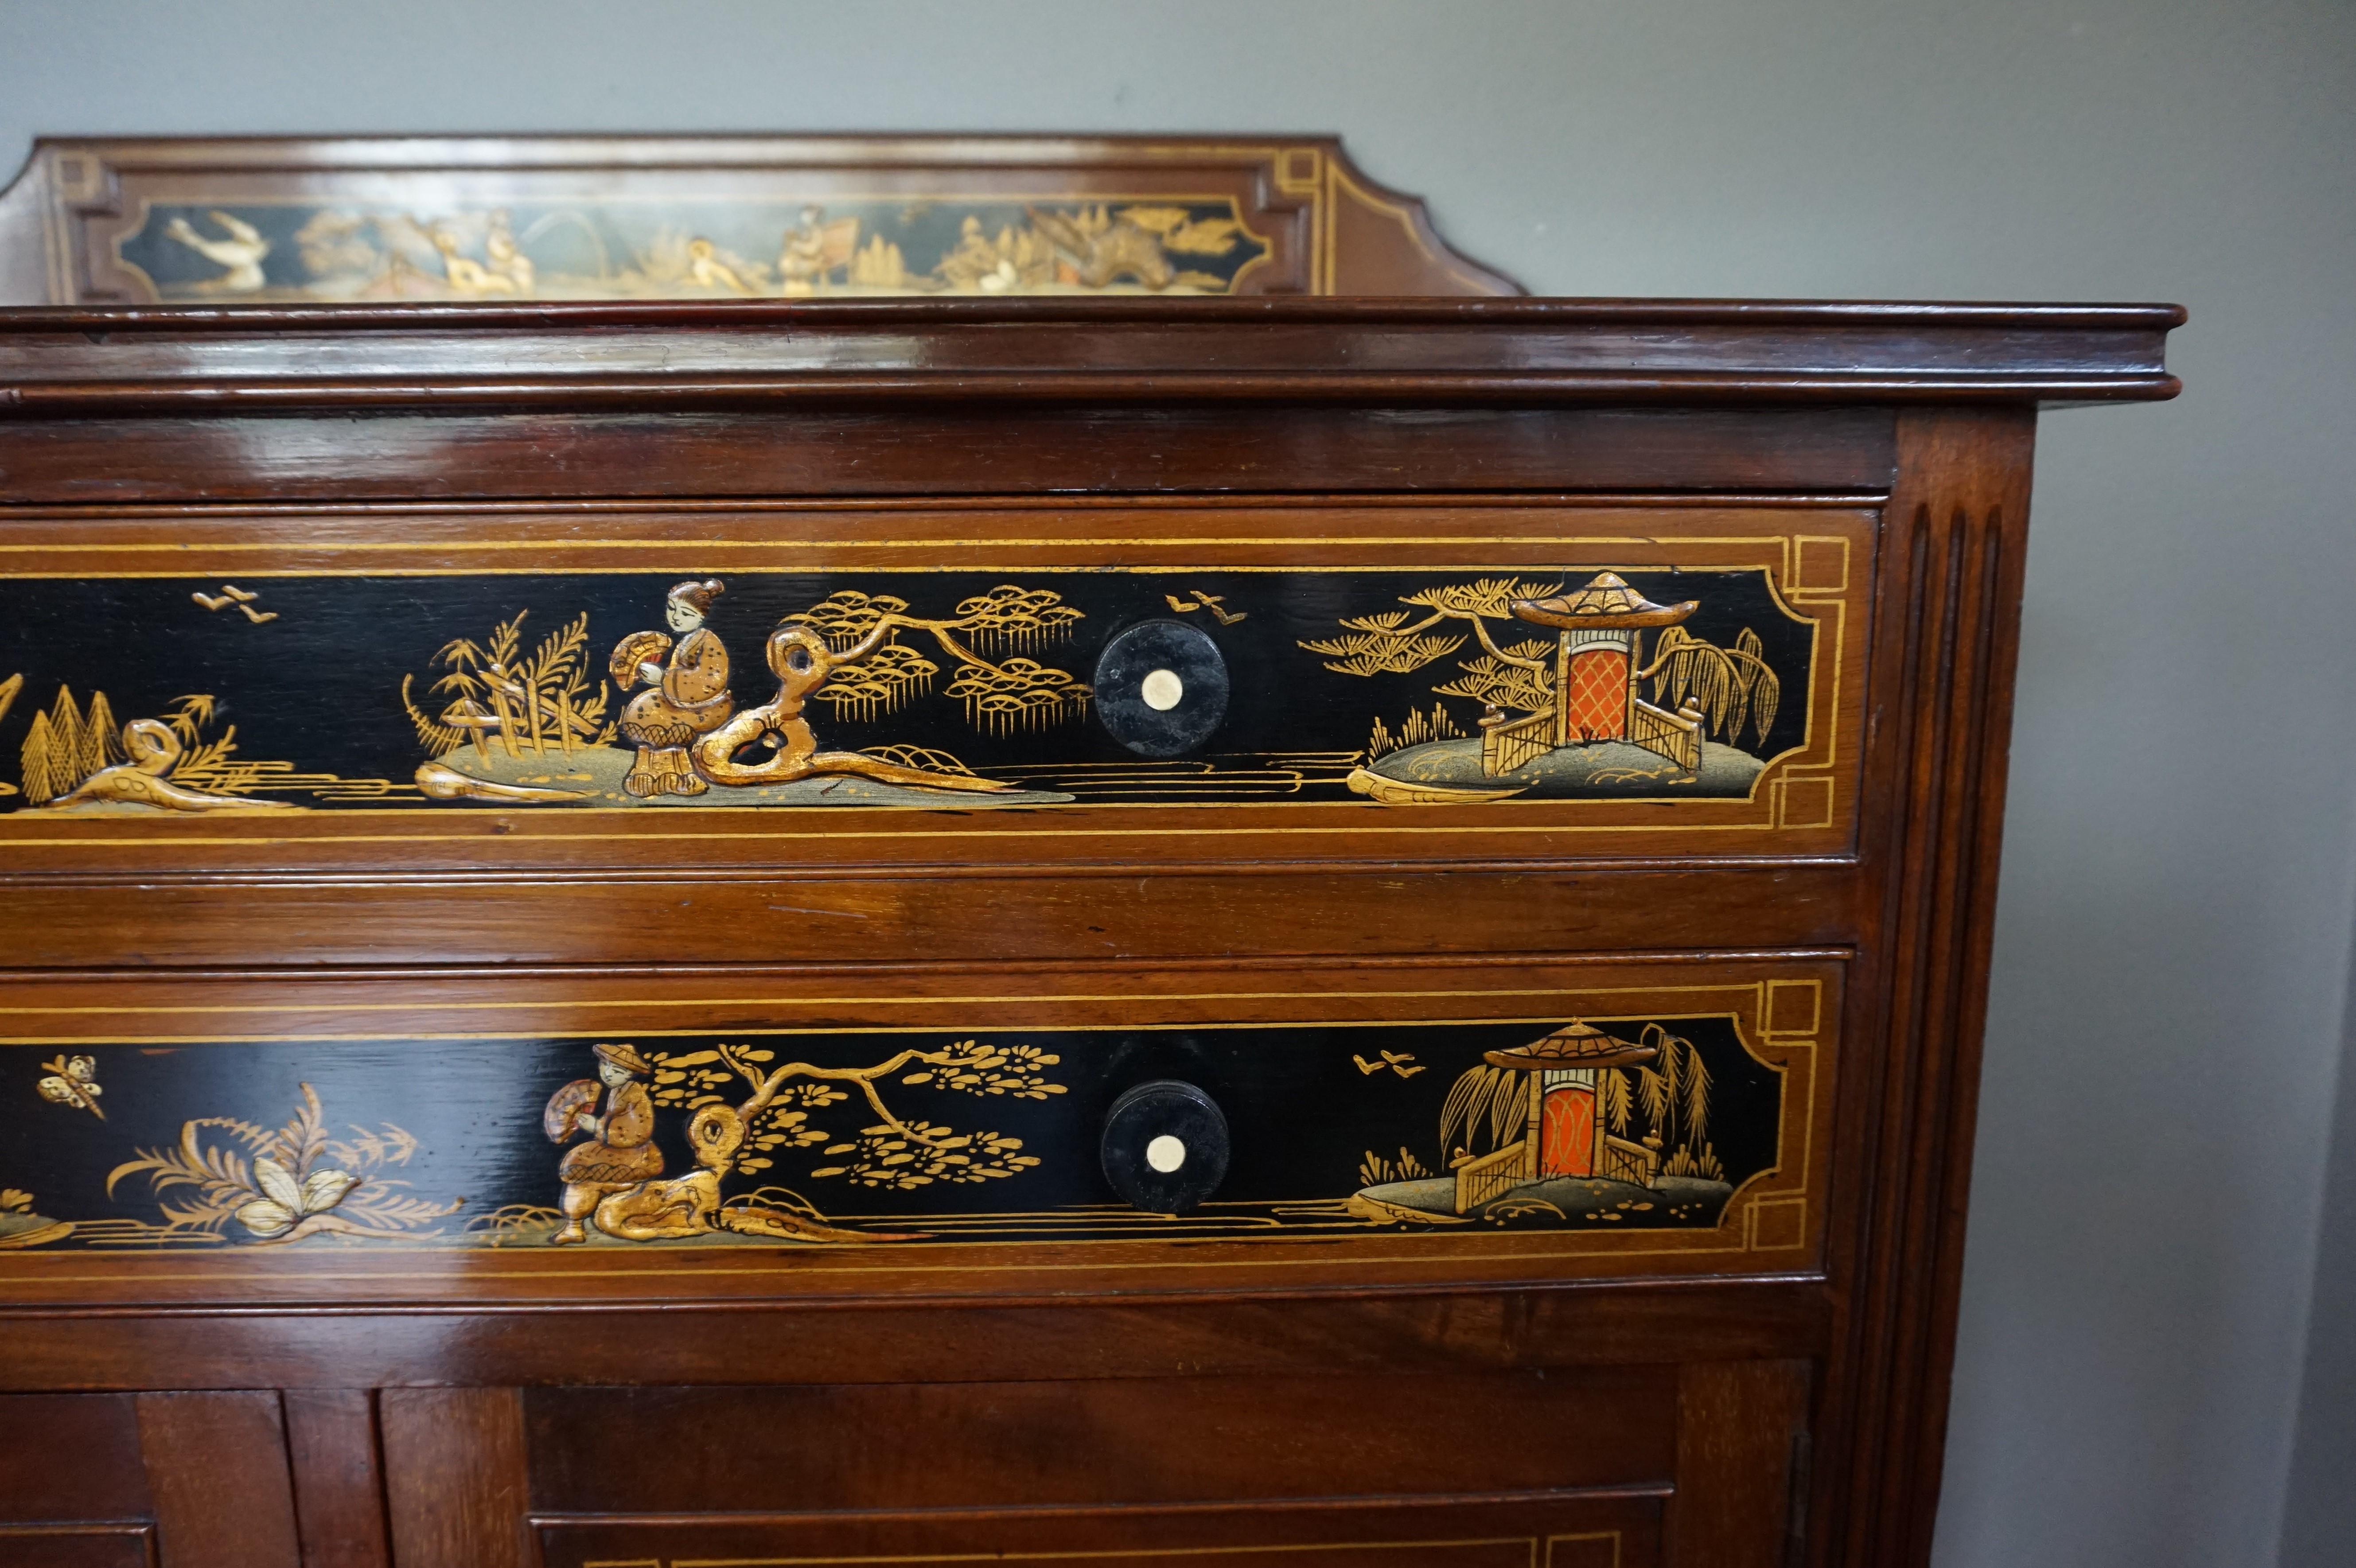 Antique & Hand-Painted, Mahogany Dresser / Commode in Stunning Chinoiserie Style 5